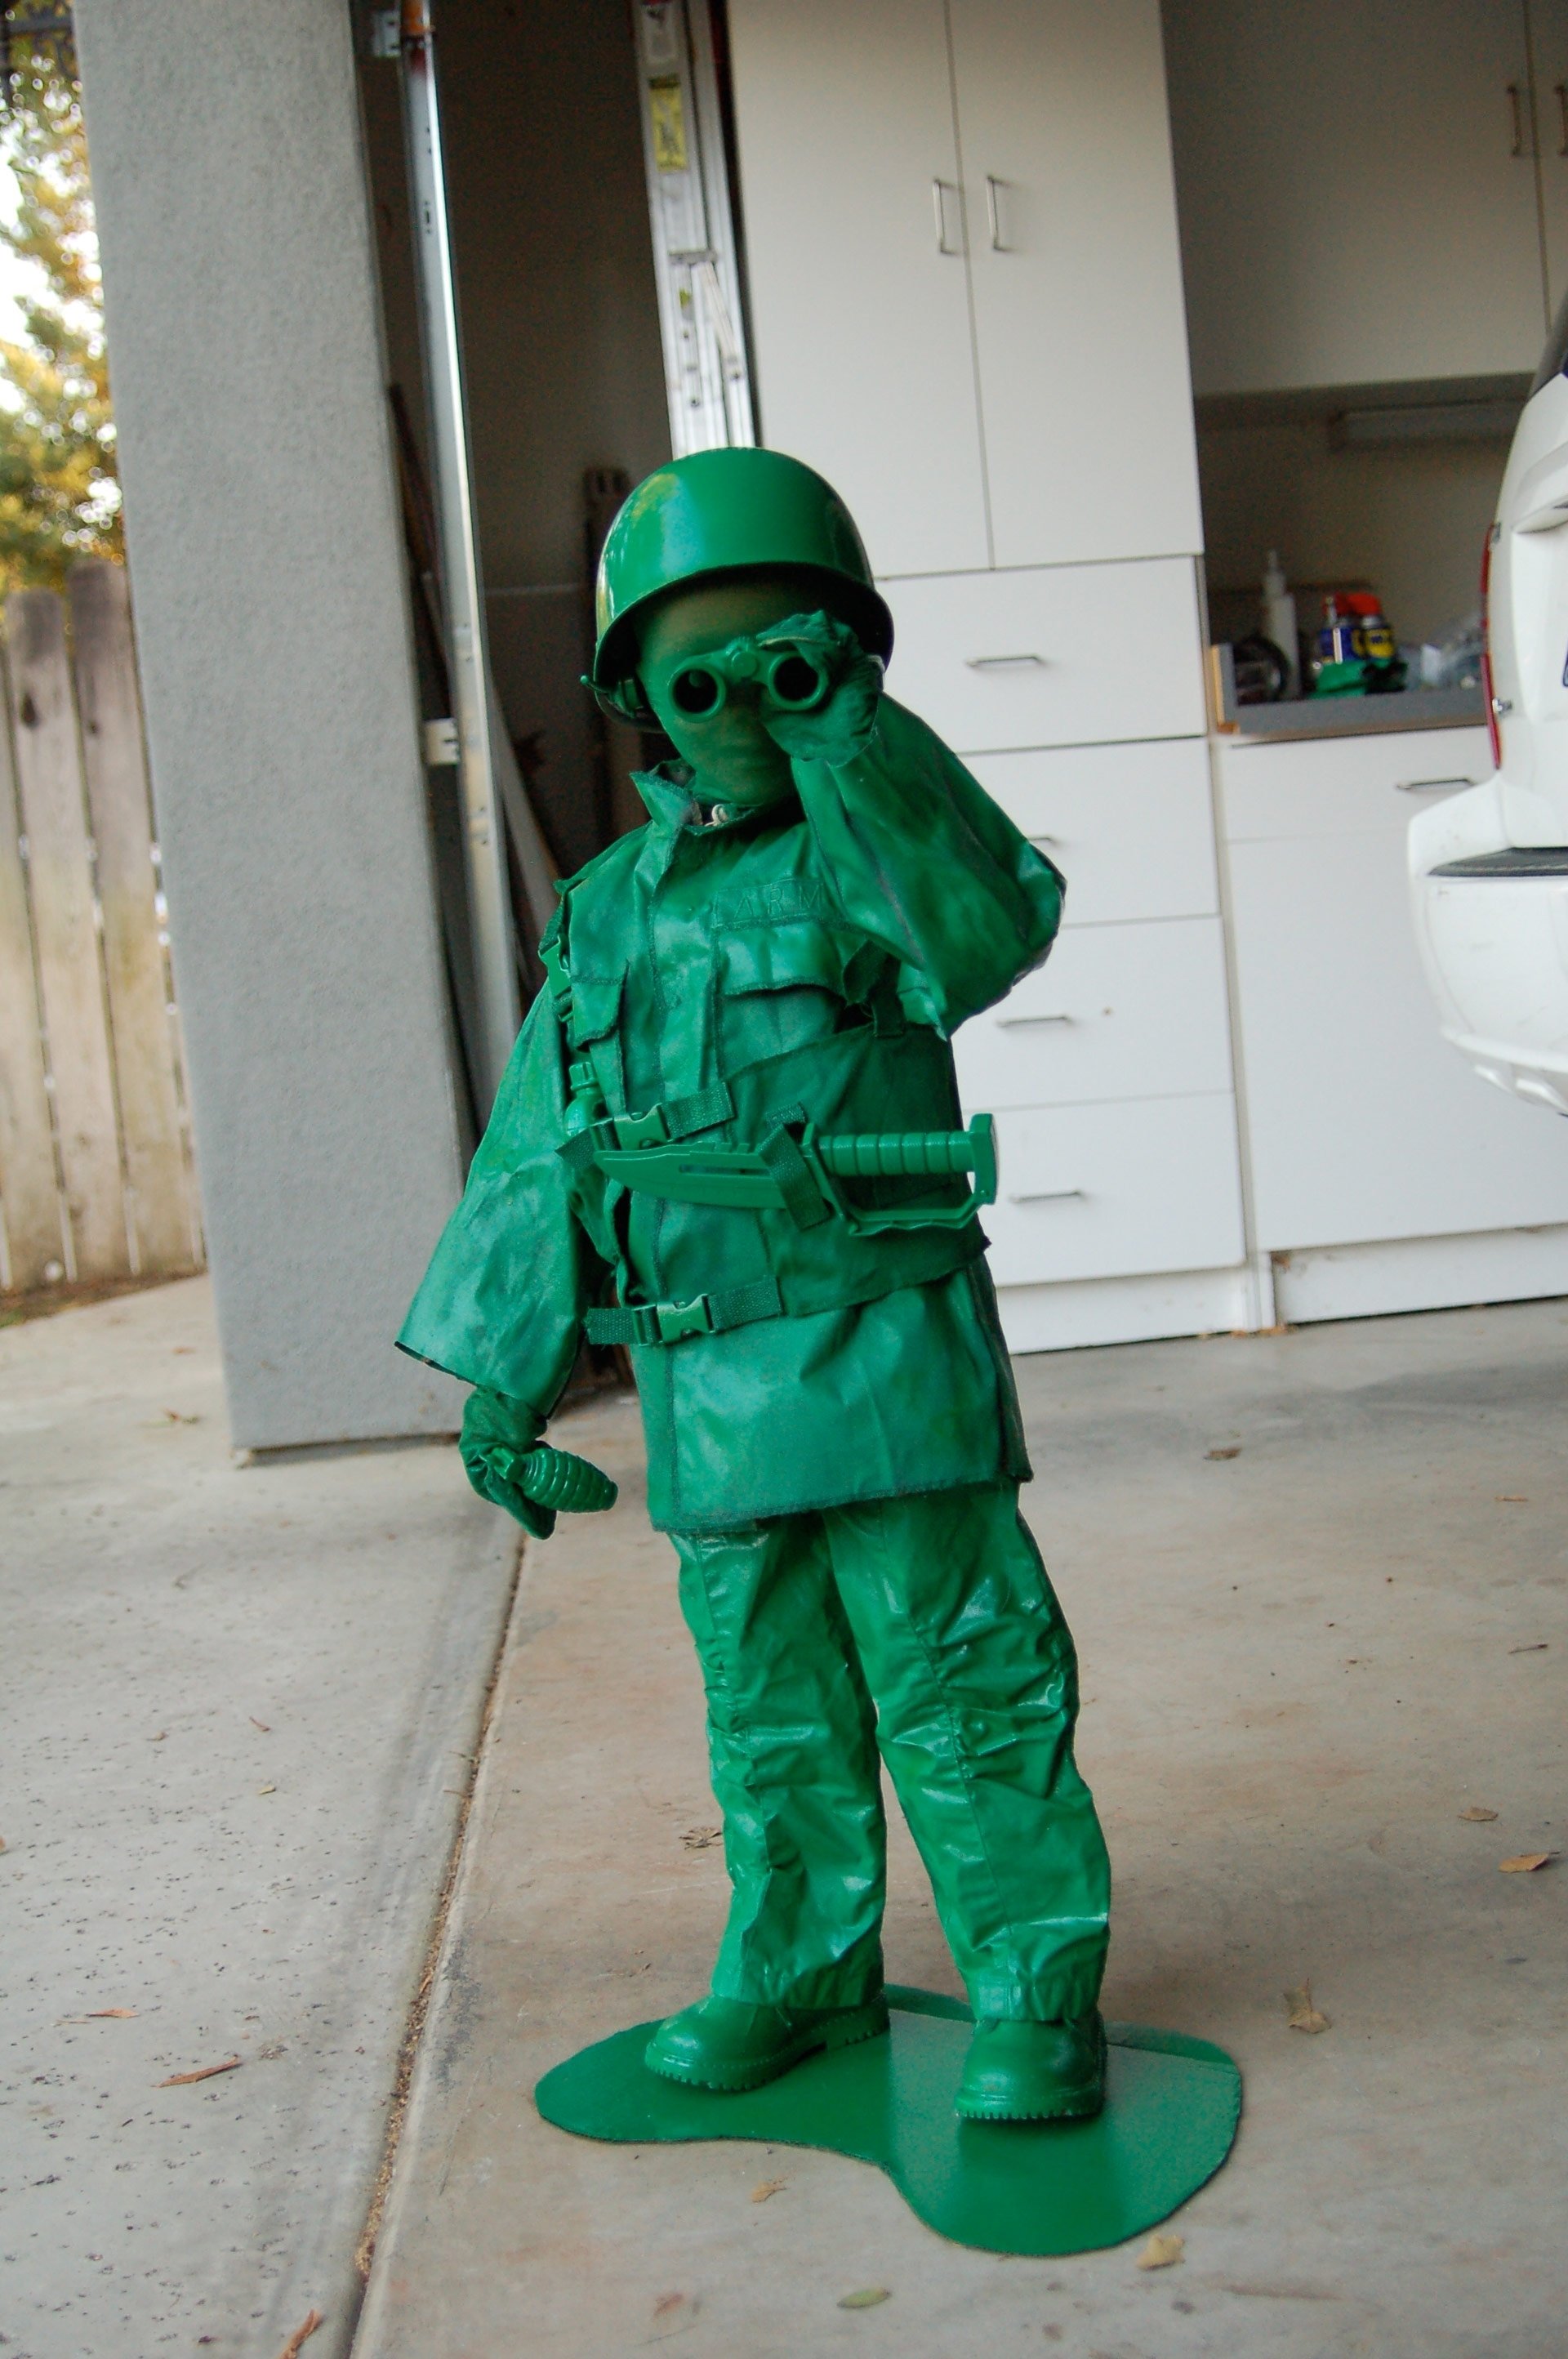 10 Famous Ideas For Halloween Costumes For Kids 62 utterly adorable homemade halloween costumes for kids army men 6 2022